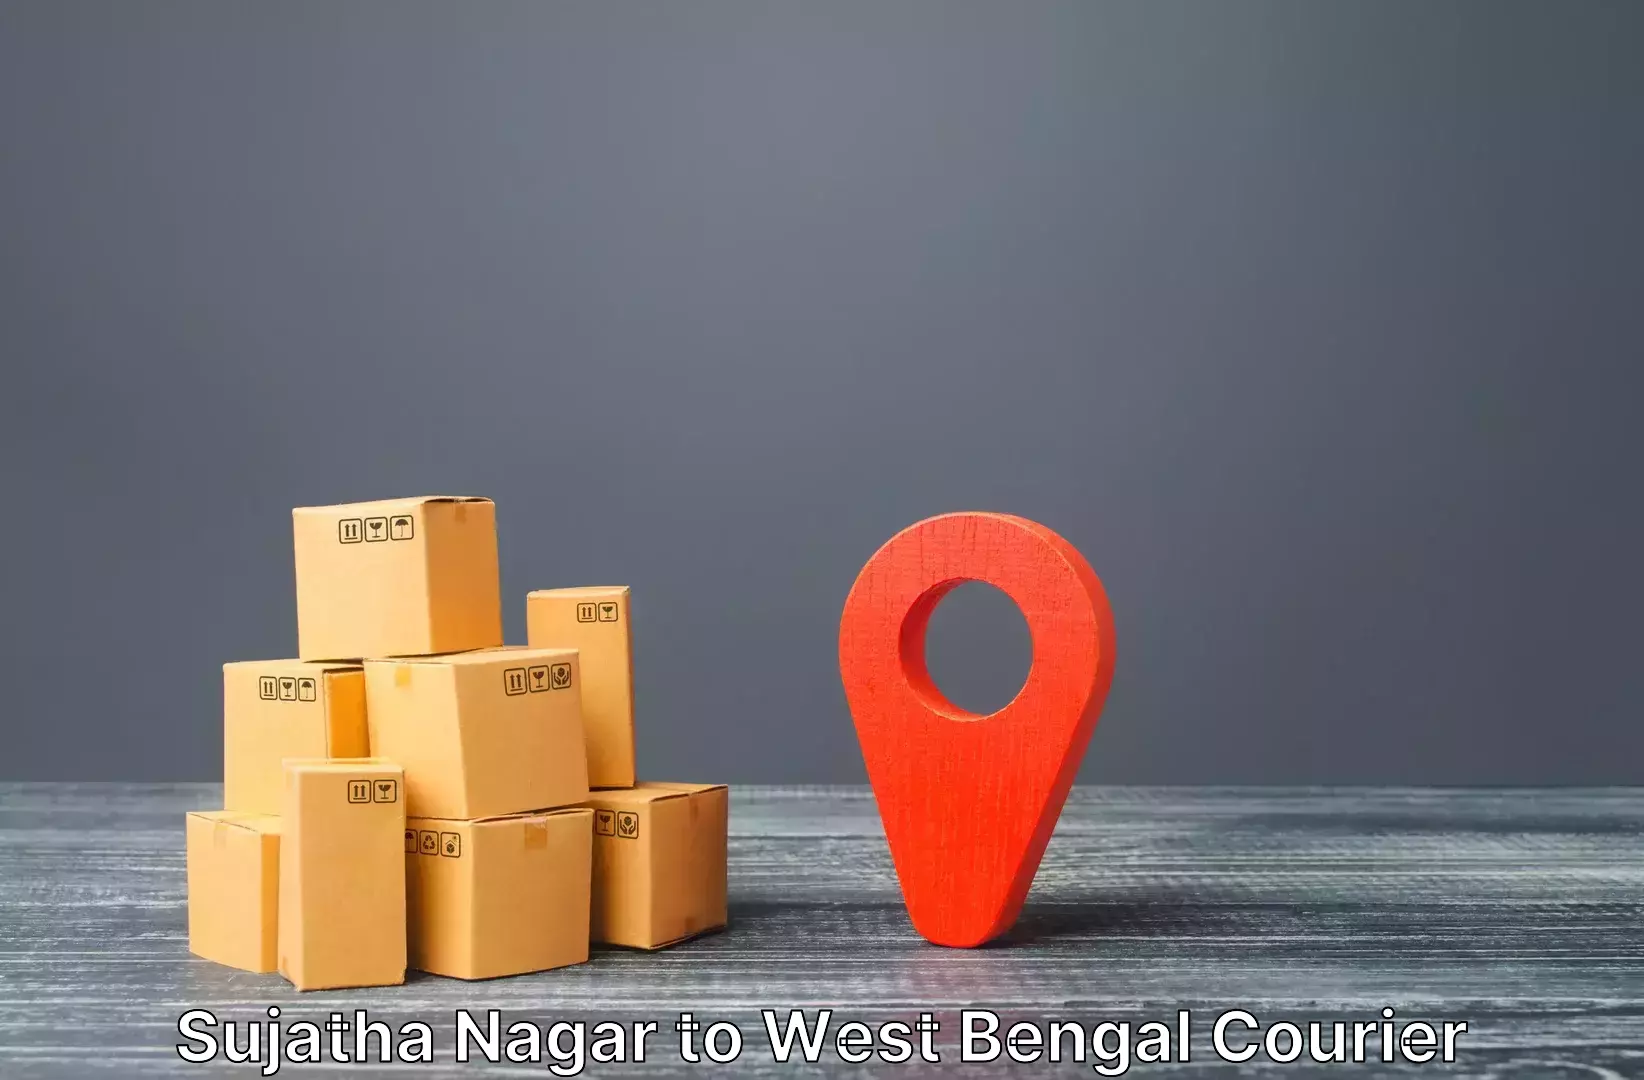 Urgent luggage shipment in Sujatha Nagar to West Bengal